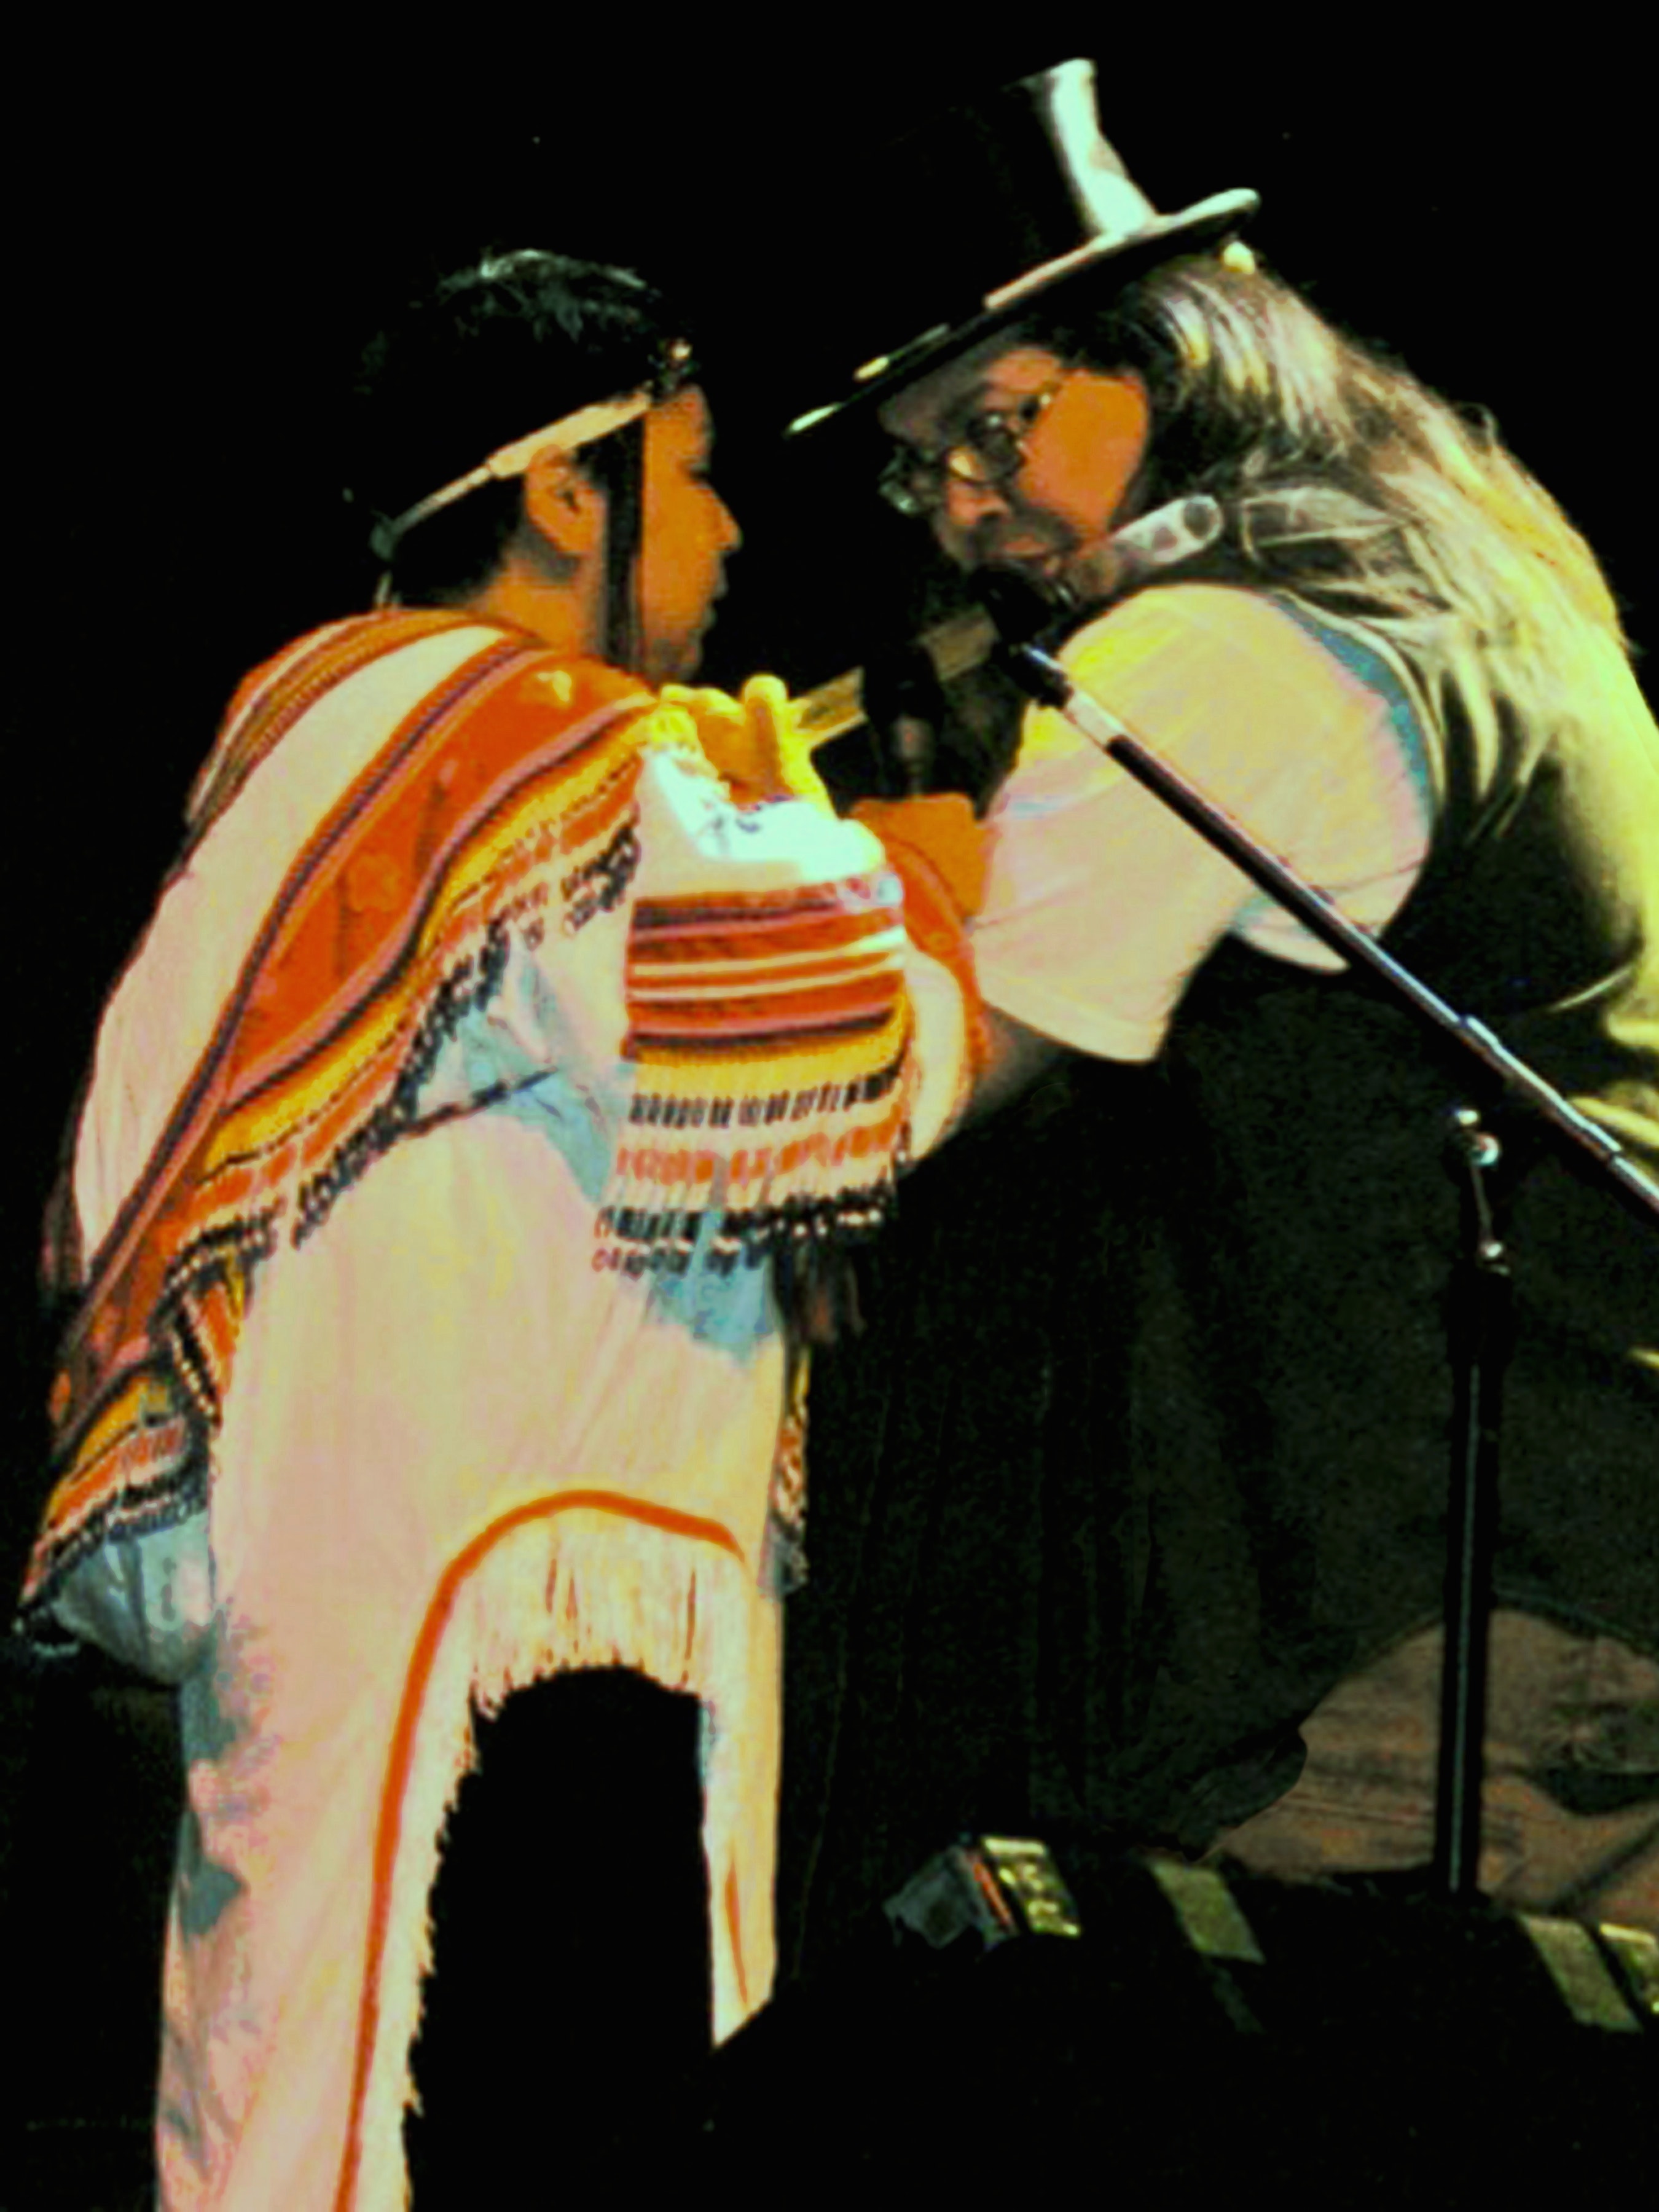 Lois Suluk and Brent Michael Davids performing at Albuquerque's El Rey Theater in 2010.